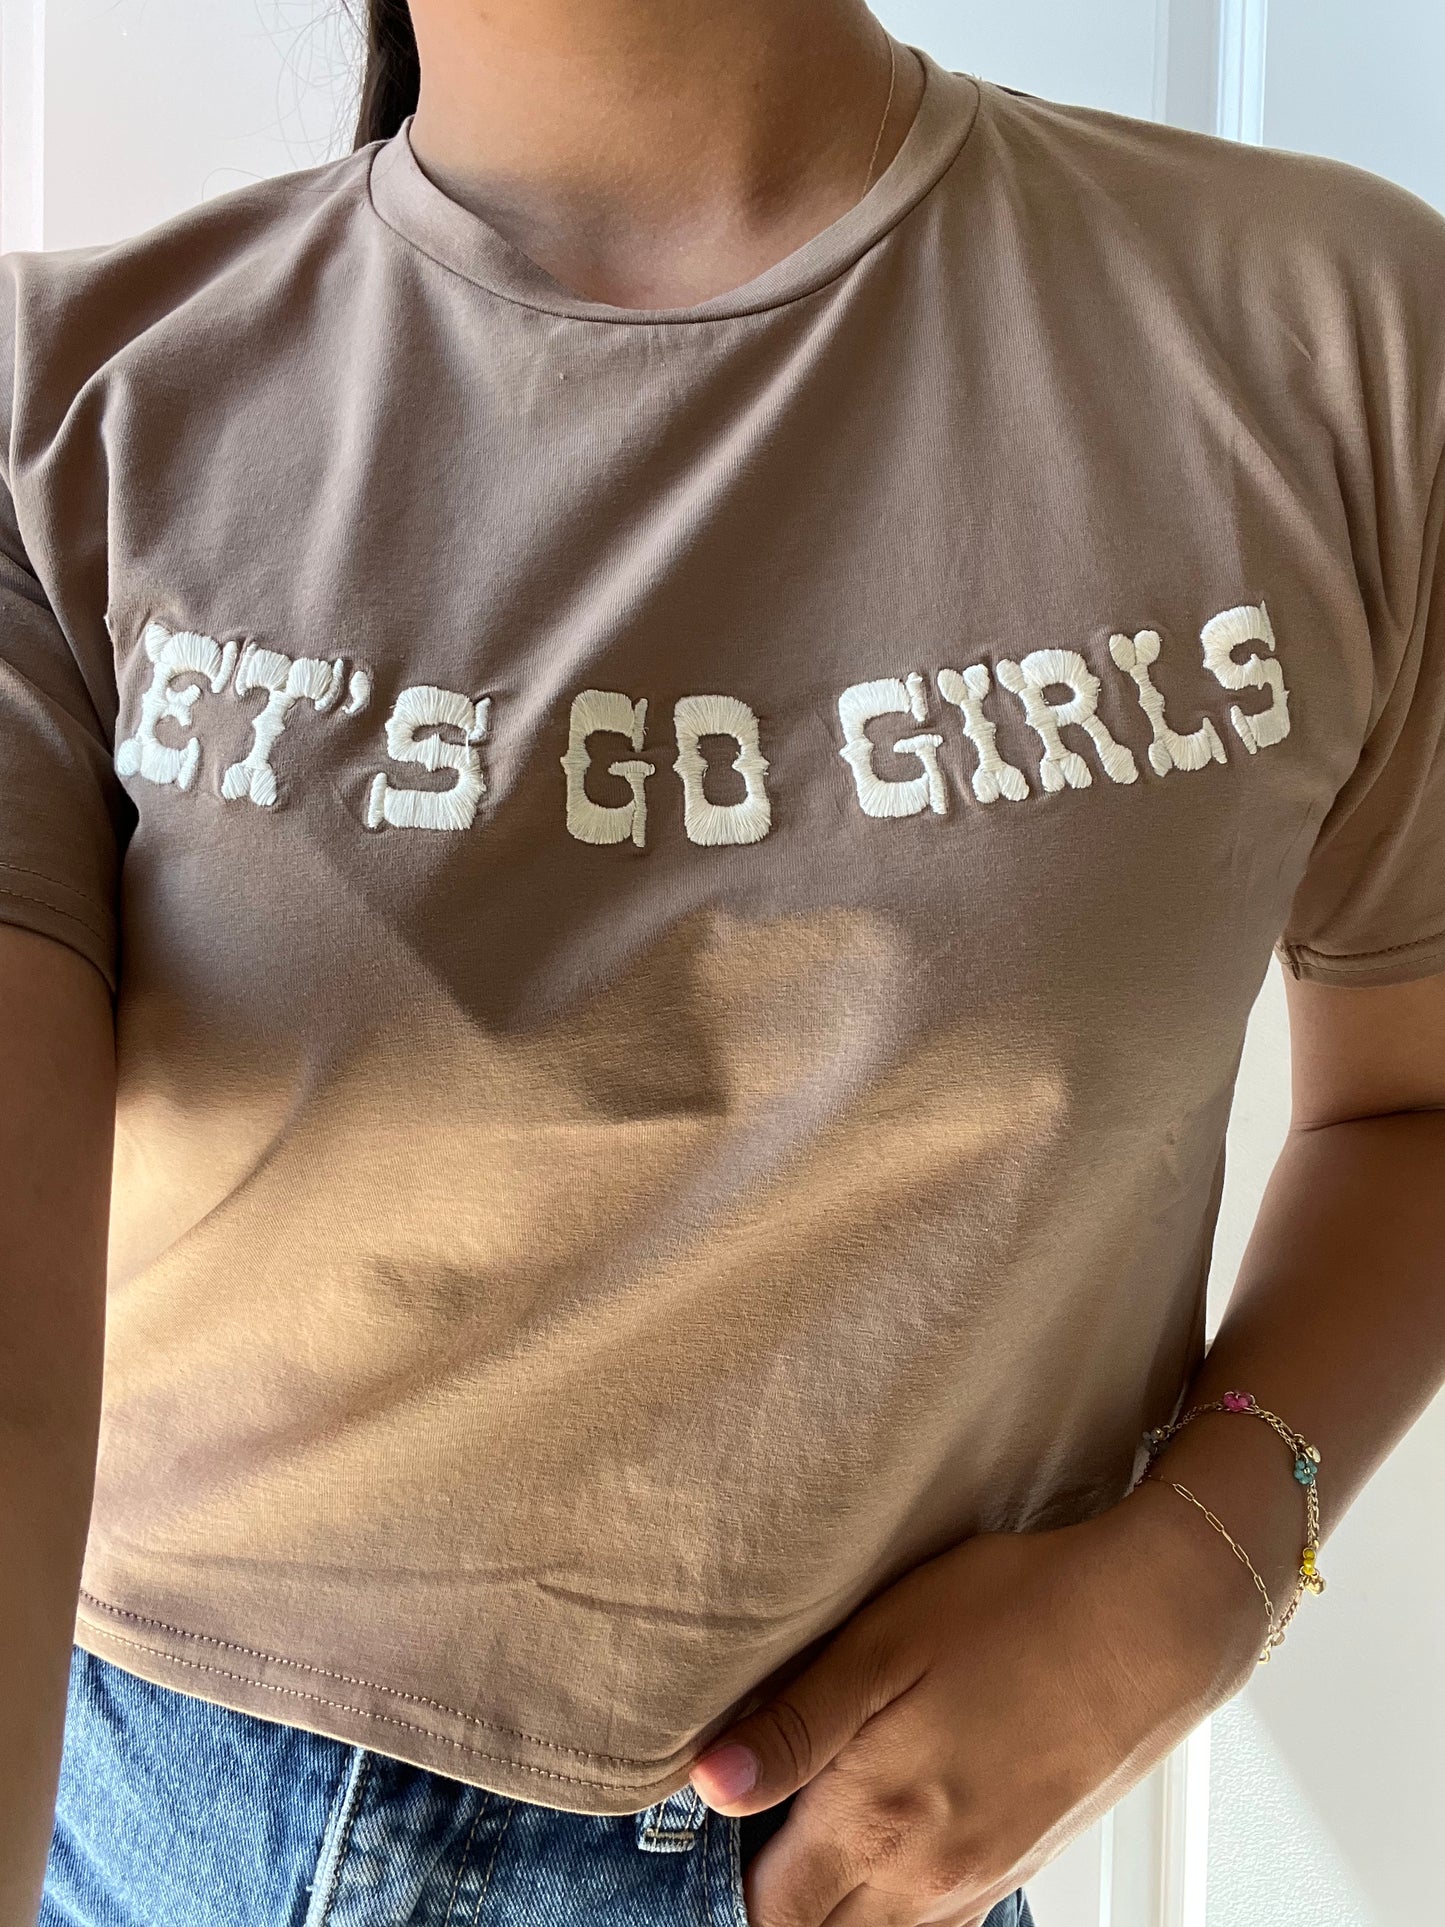 LET'S GO GIRLS EMBROIDERED Tee